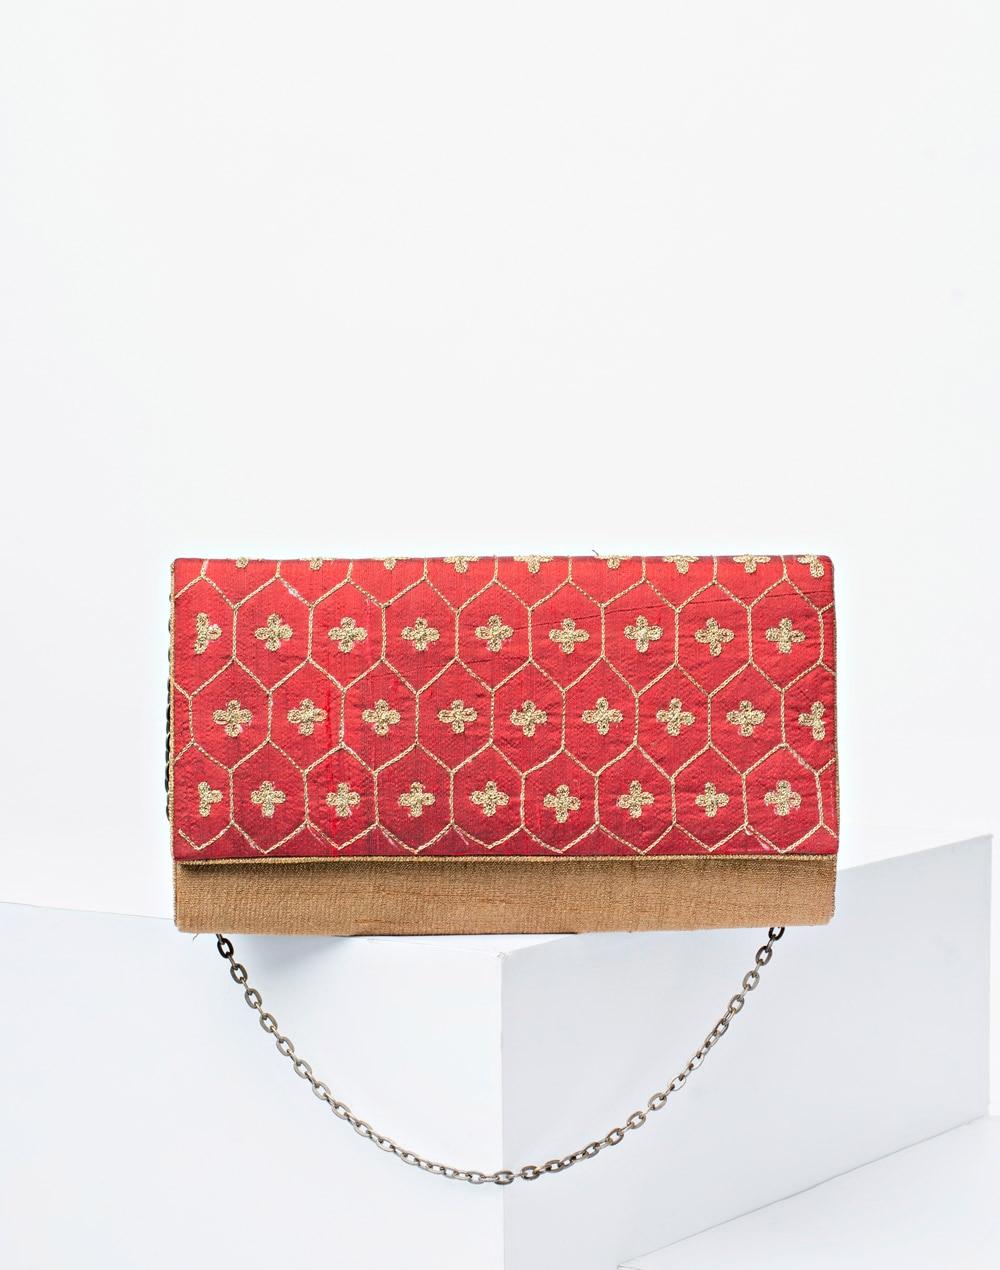 silk jaal embroidered clutch bag